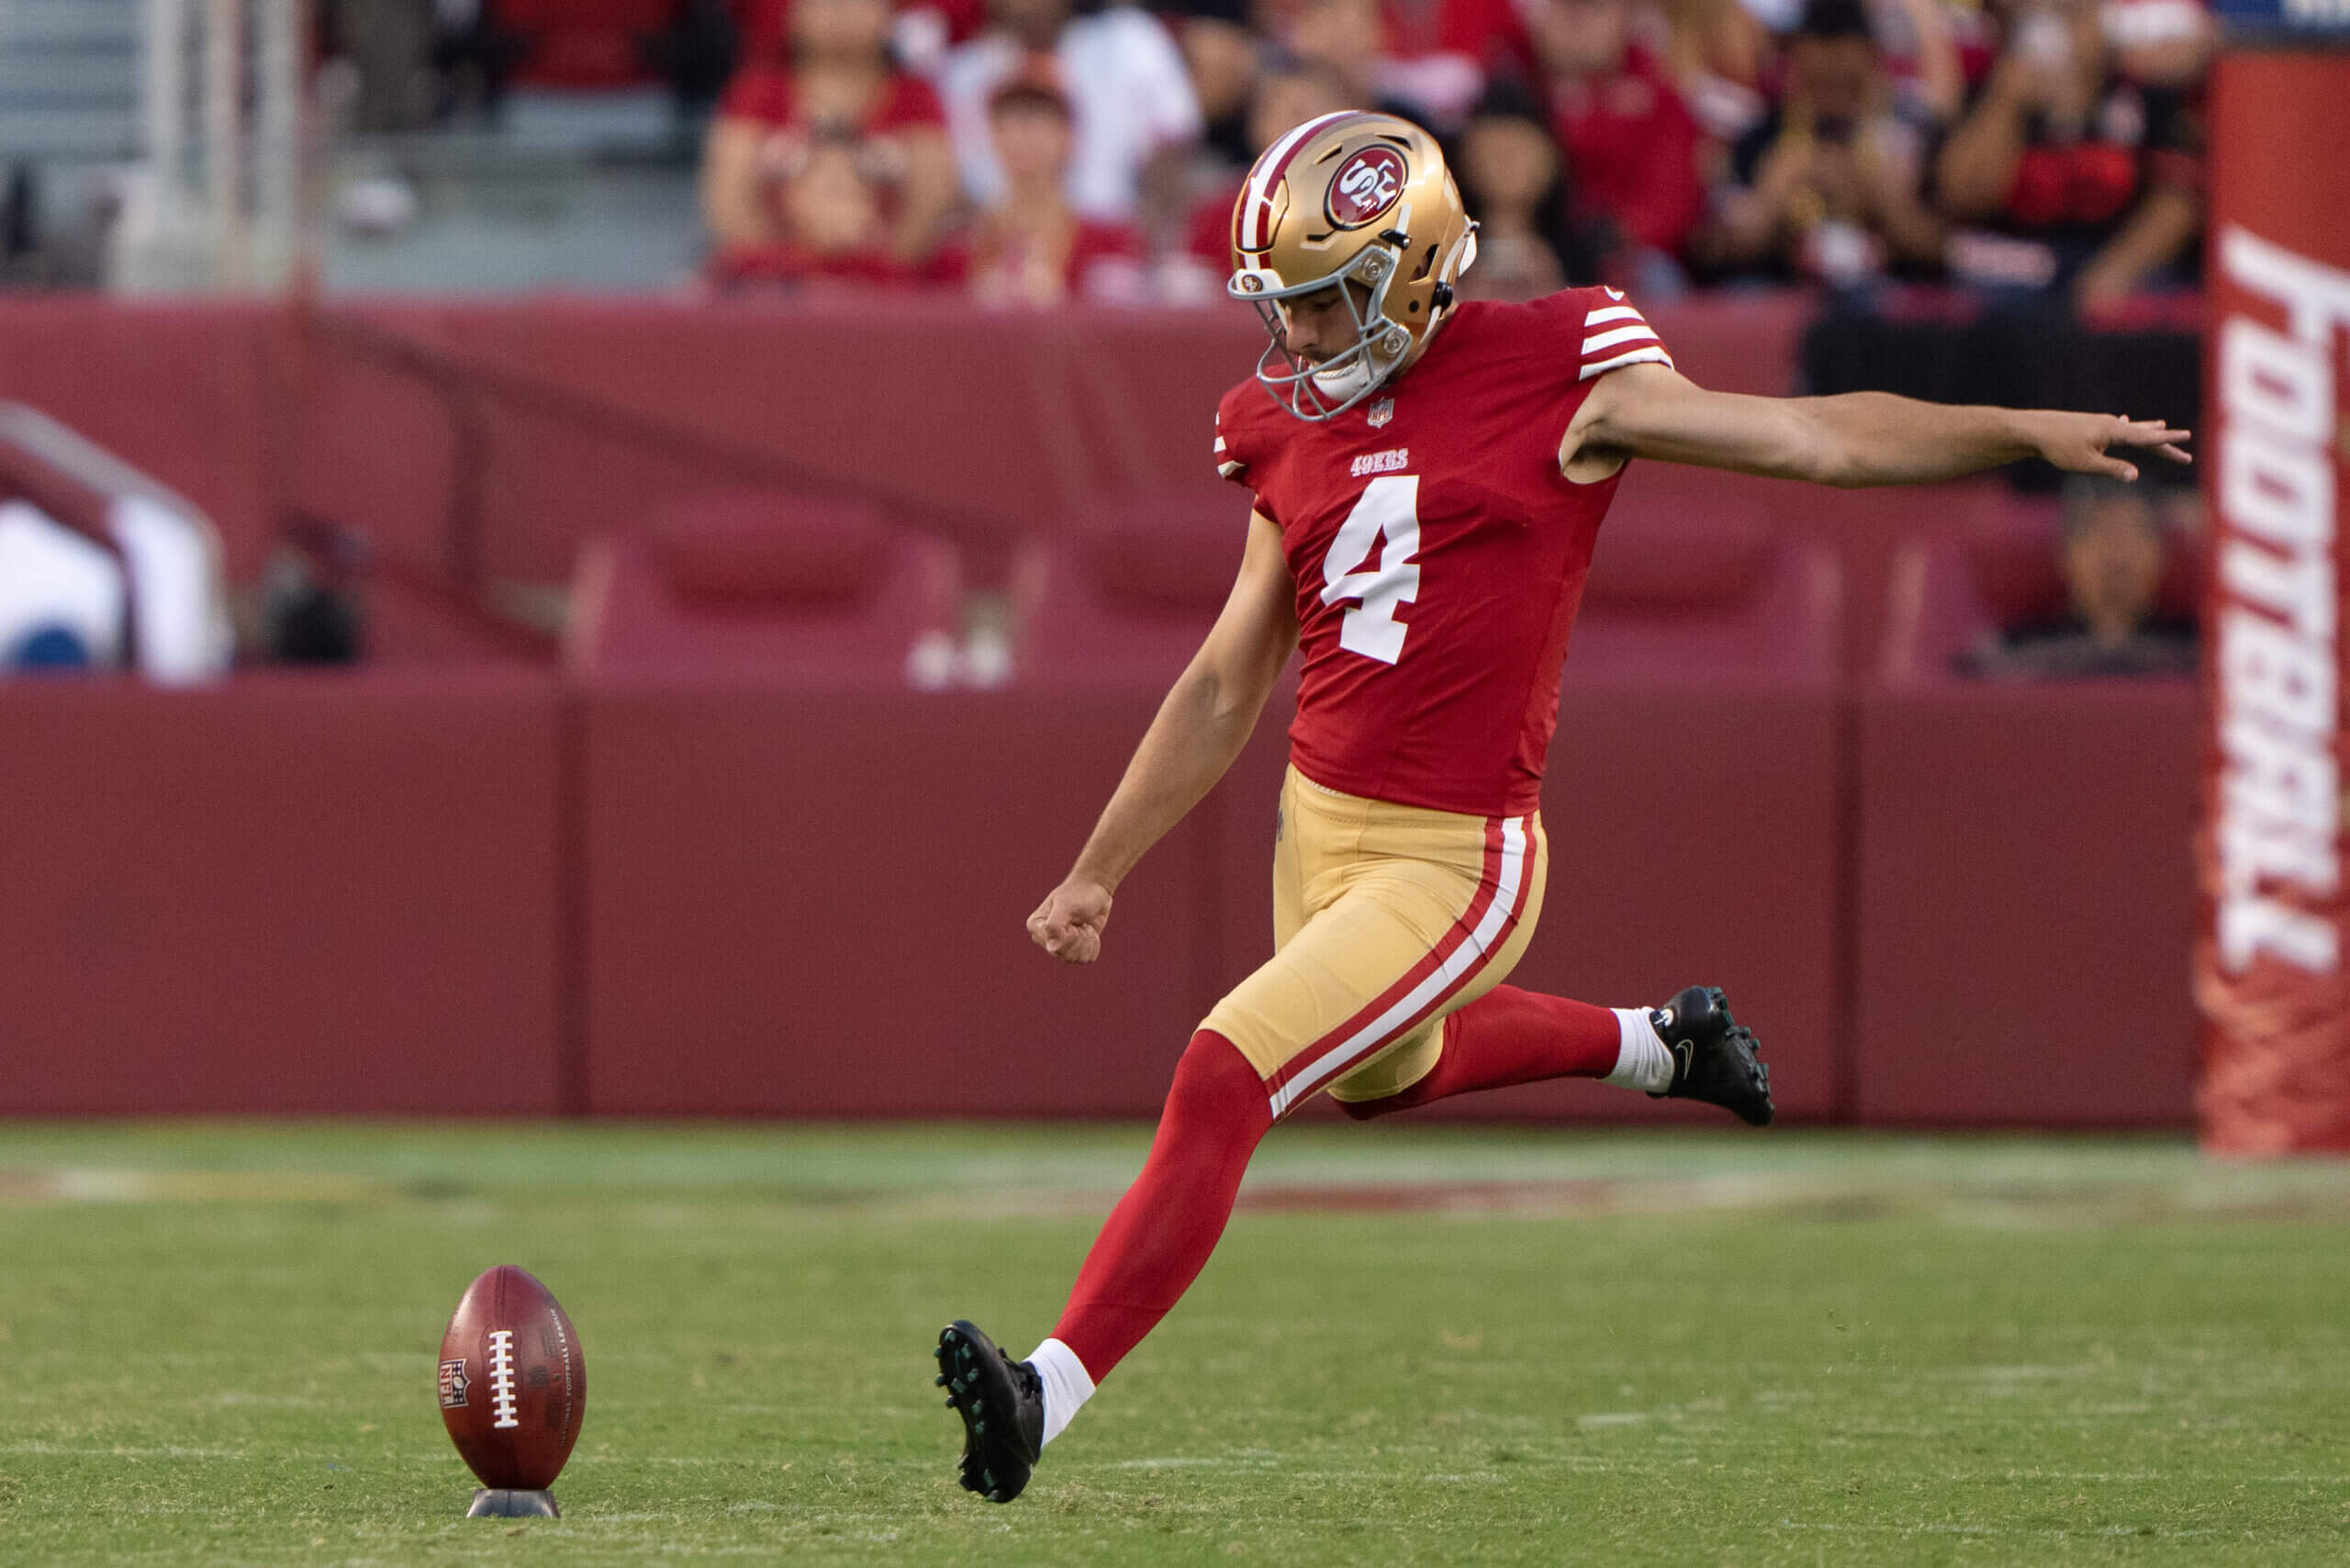 'It's a race to figure it out': 49ers embracing, experimenting with new kickoffs